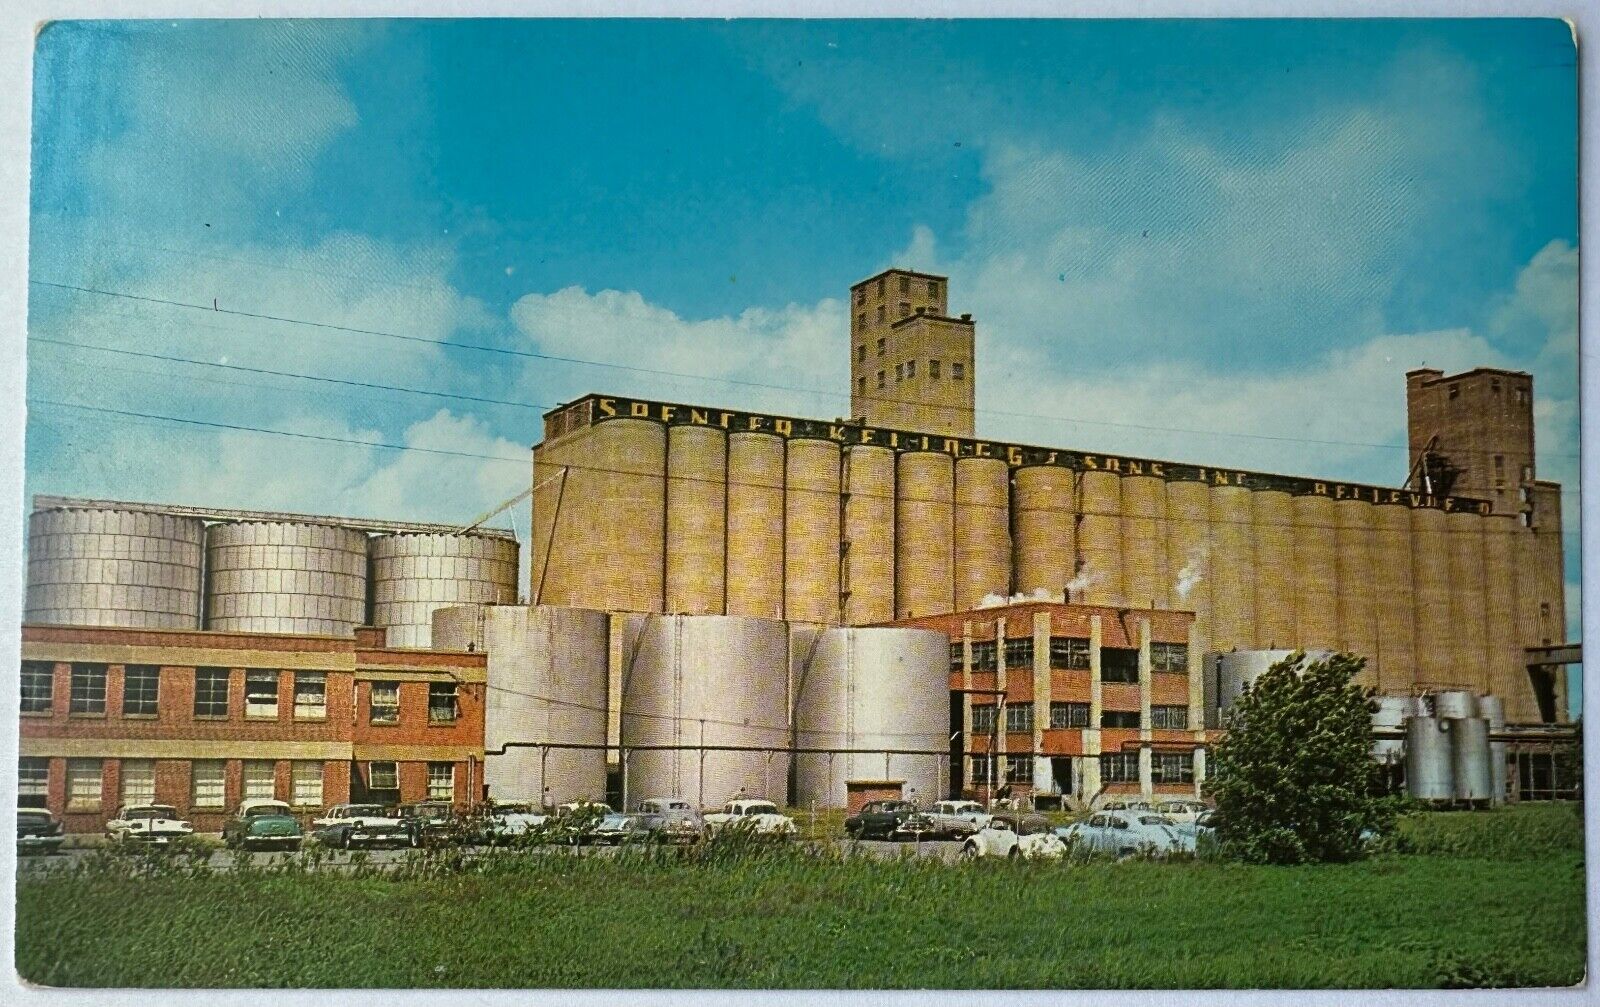 Bellevue Ohio Spencer Kellogg Soy Bean Products Farming Postcard c1950s